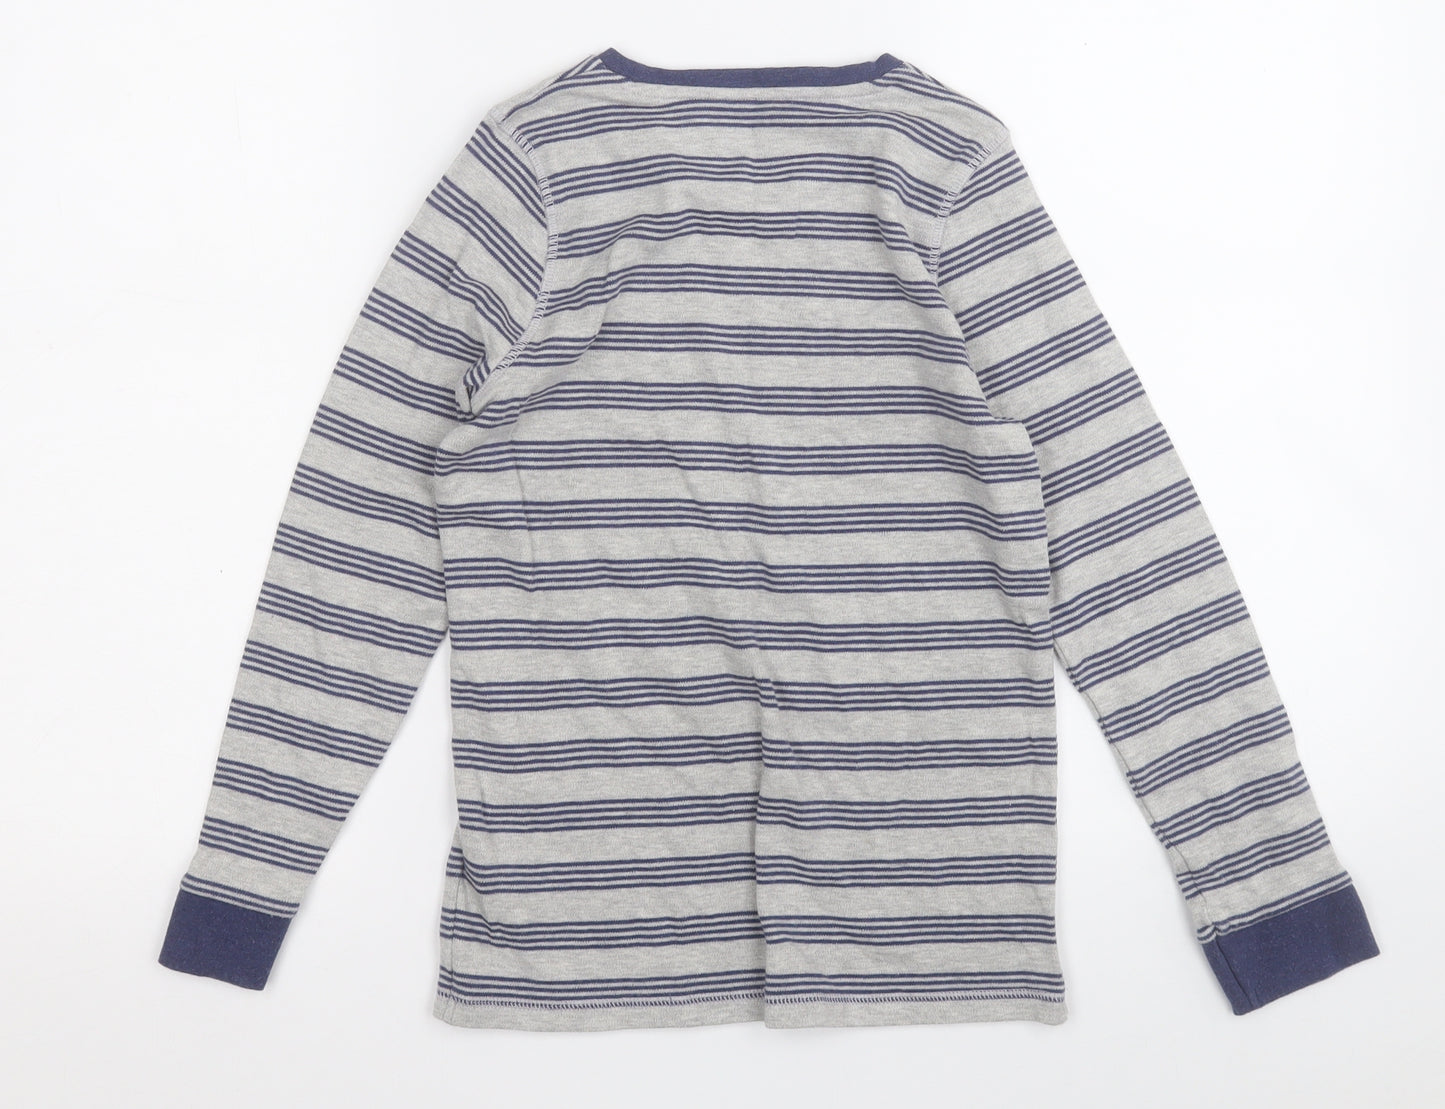 Marks and Spencer Boys Grey Round Neck Striped Cotton Pullover Jumper Size 11-12 Years